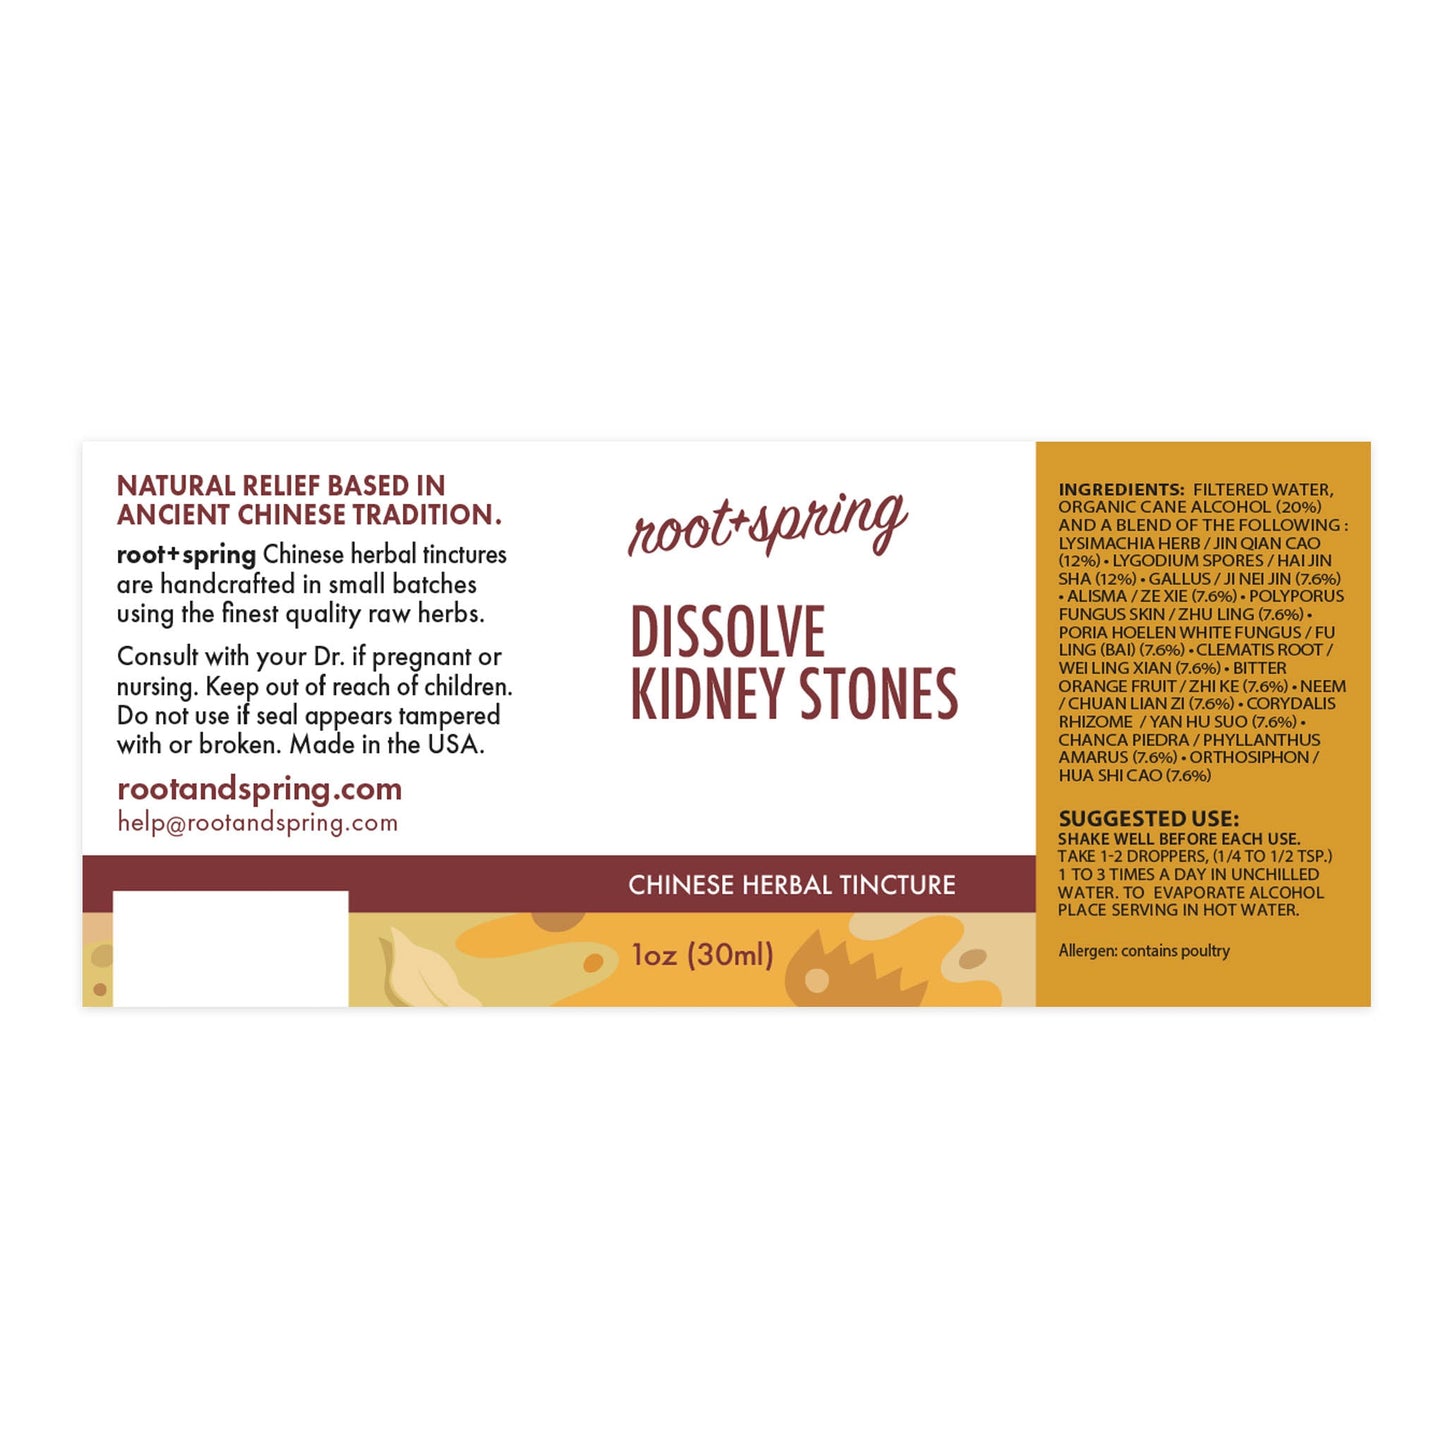 Label of Dissolve Kidney Stones Herbal Tincture by root + spring.